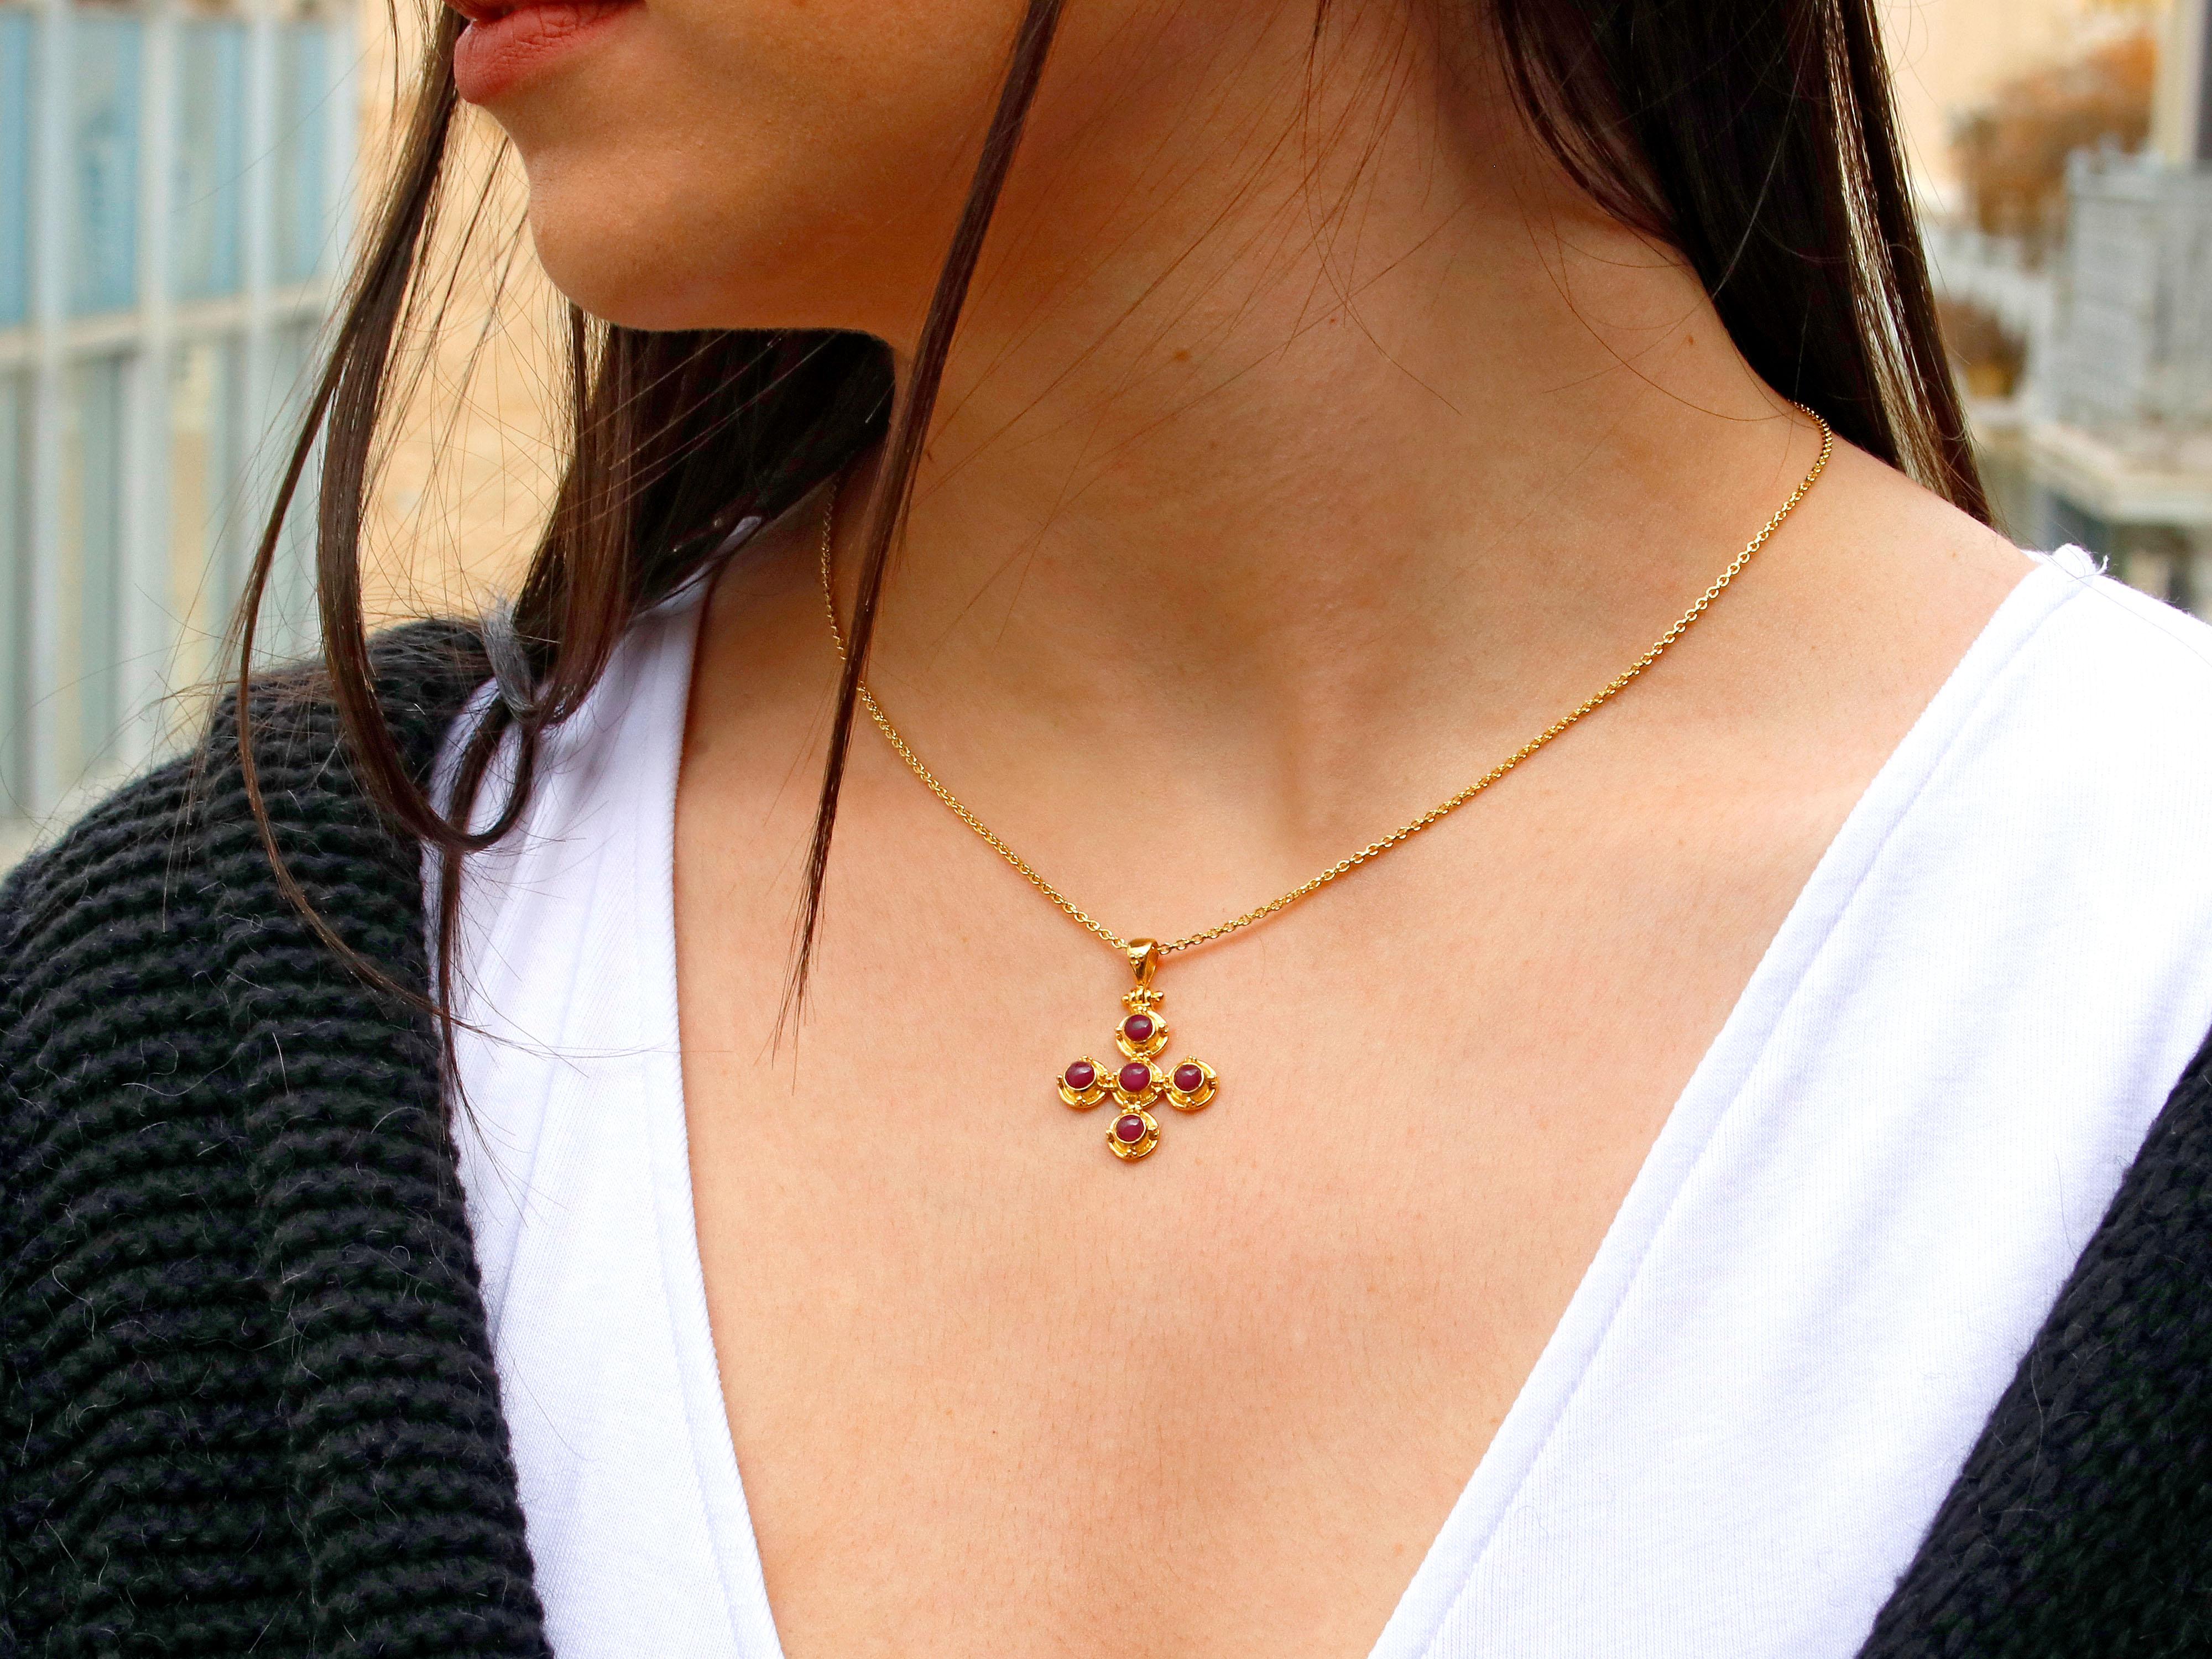  18k gold cross pendant with rubies and granulation decoration that combines elegance and religious symbolism.

The cross is adorned with rubies, which are precious gemstones known for their vibrant red color. Rubies have long been associated with